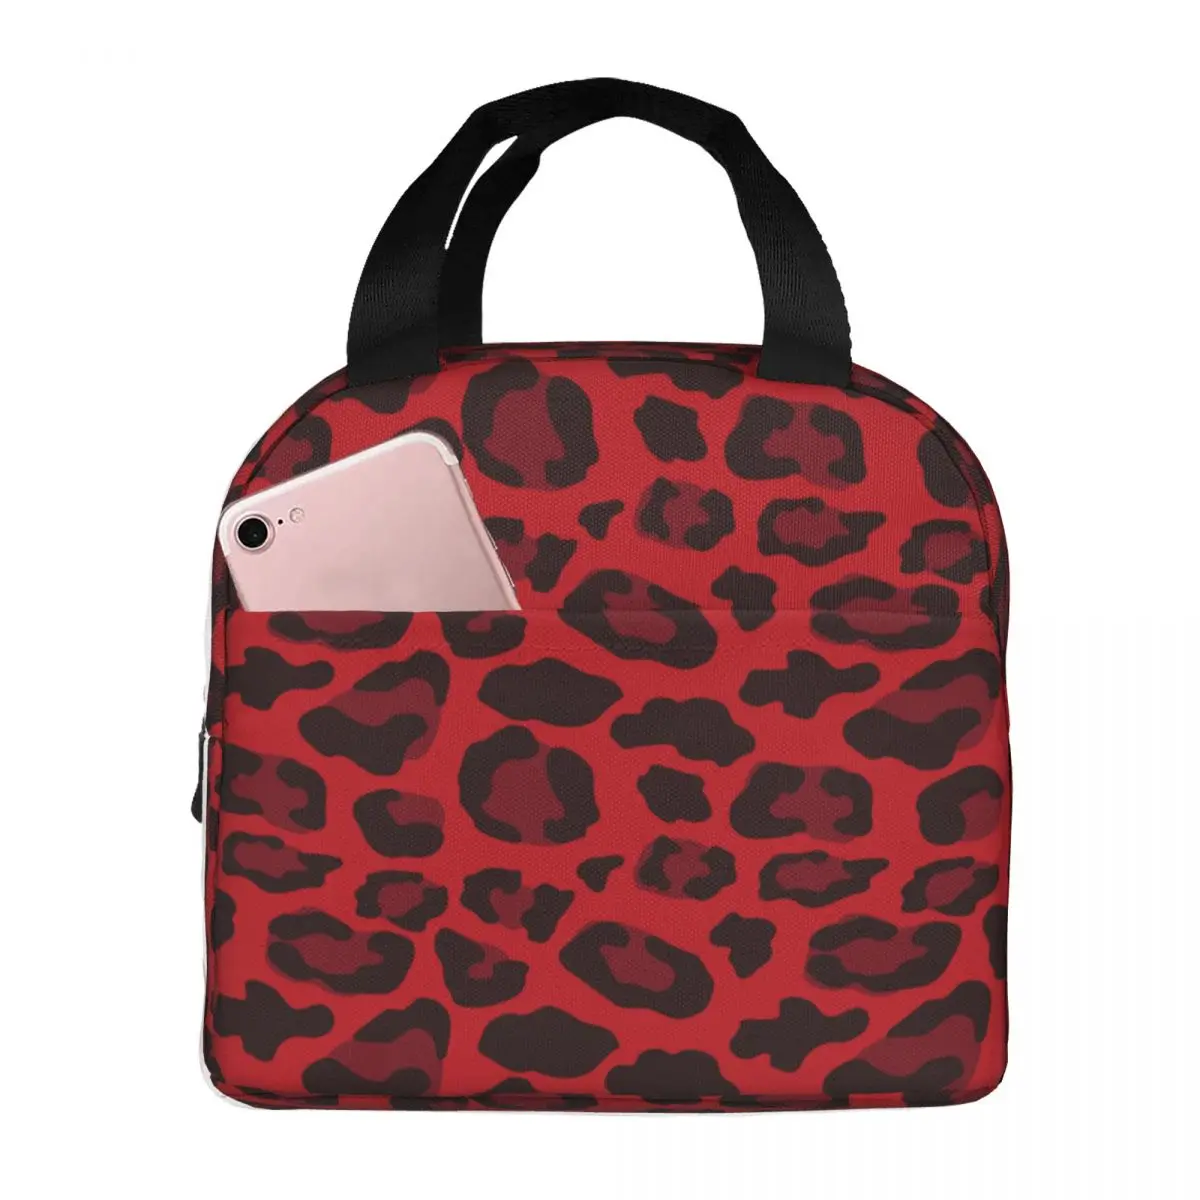 Leopard Printed Red Lunch Bag Portable Insulated Oxford Cooler Thermal Cold Food Picnic Tote for Women Kids